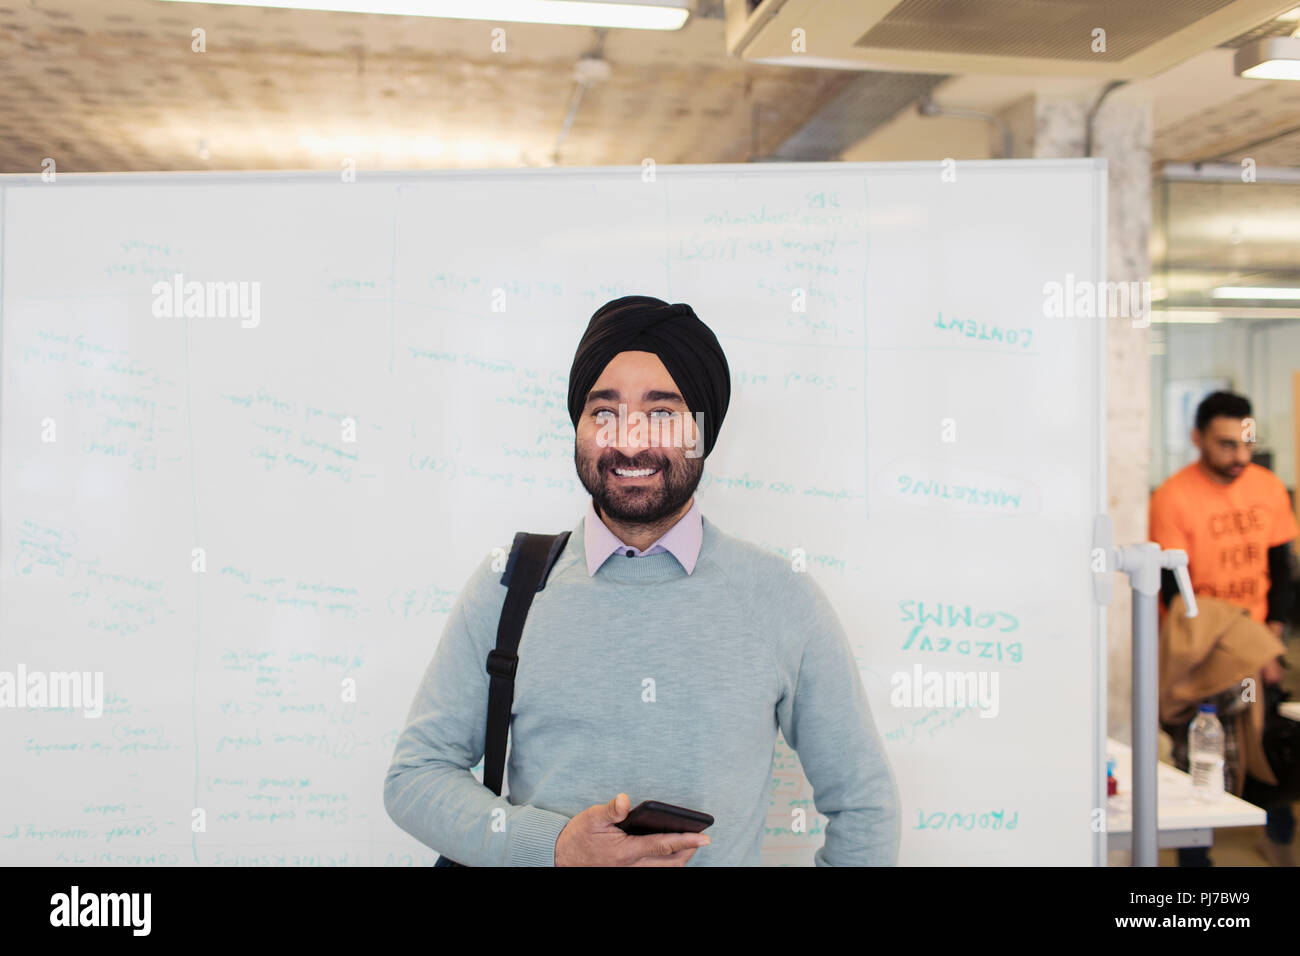 Portrait smiling, confident Indian businessman in turban standing at whiteboard in office Stock Photo